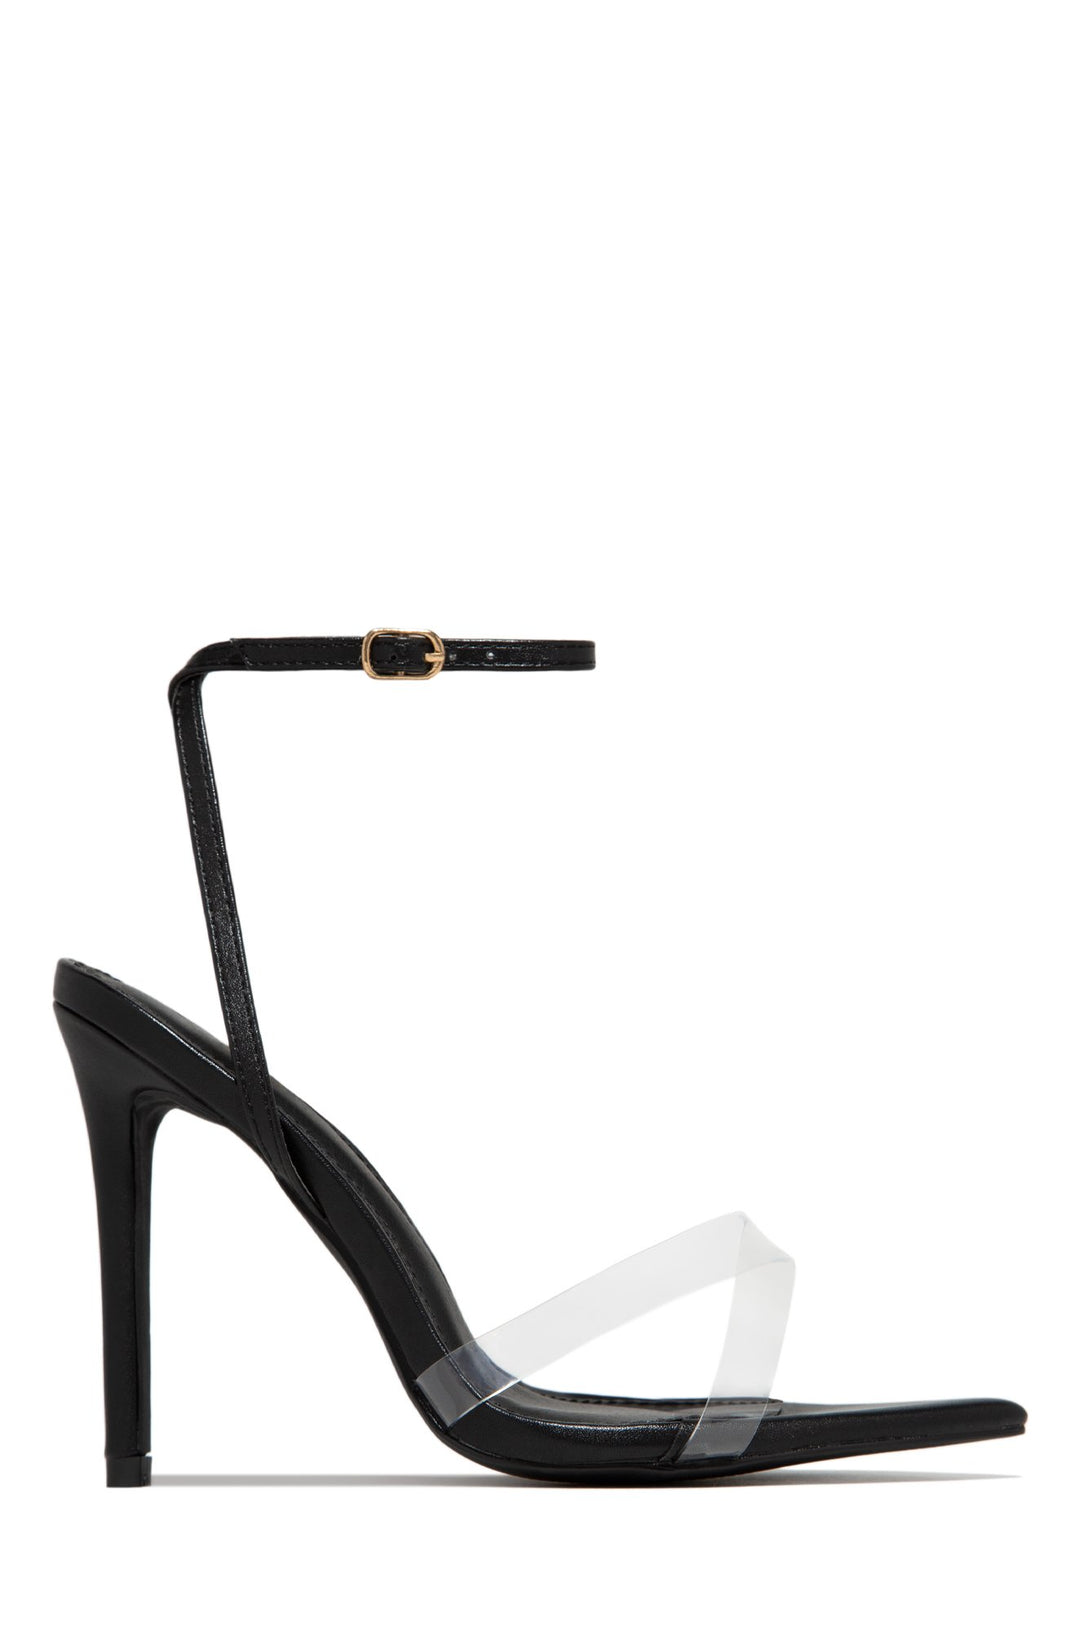 Clear Intentions High Heel (Black)